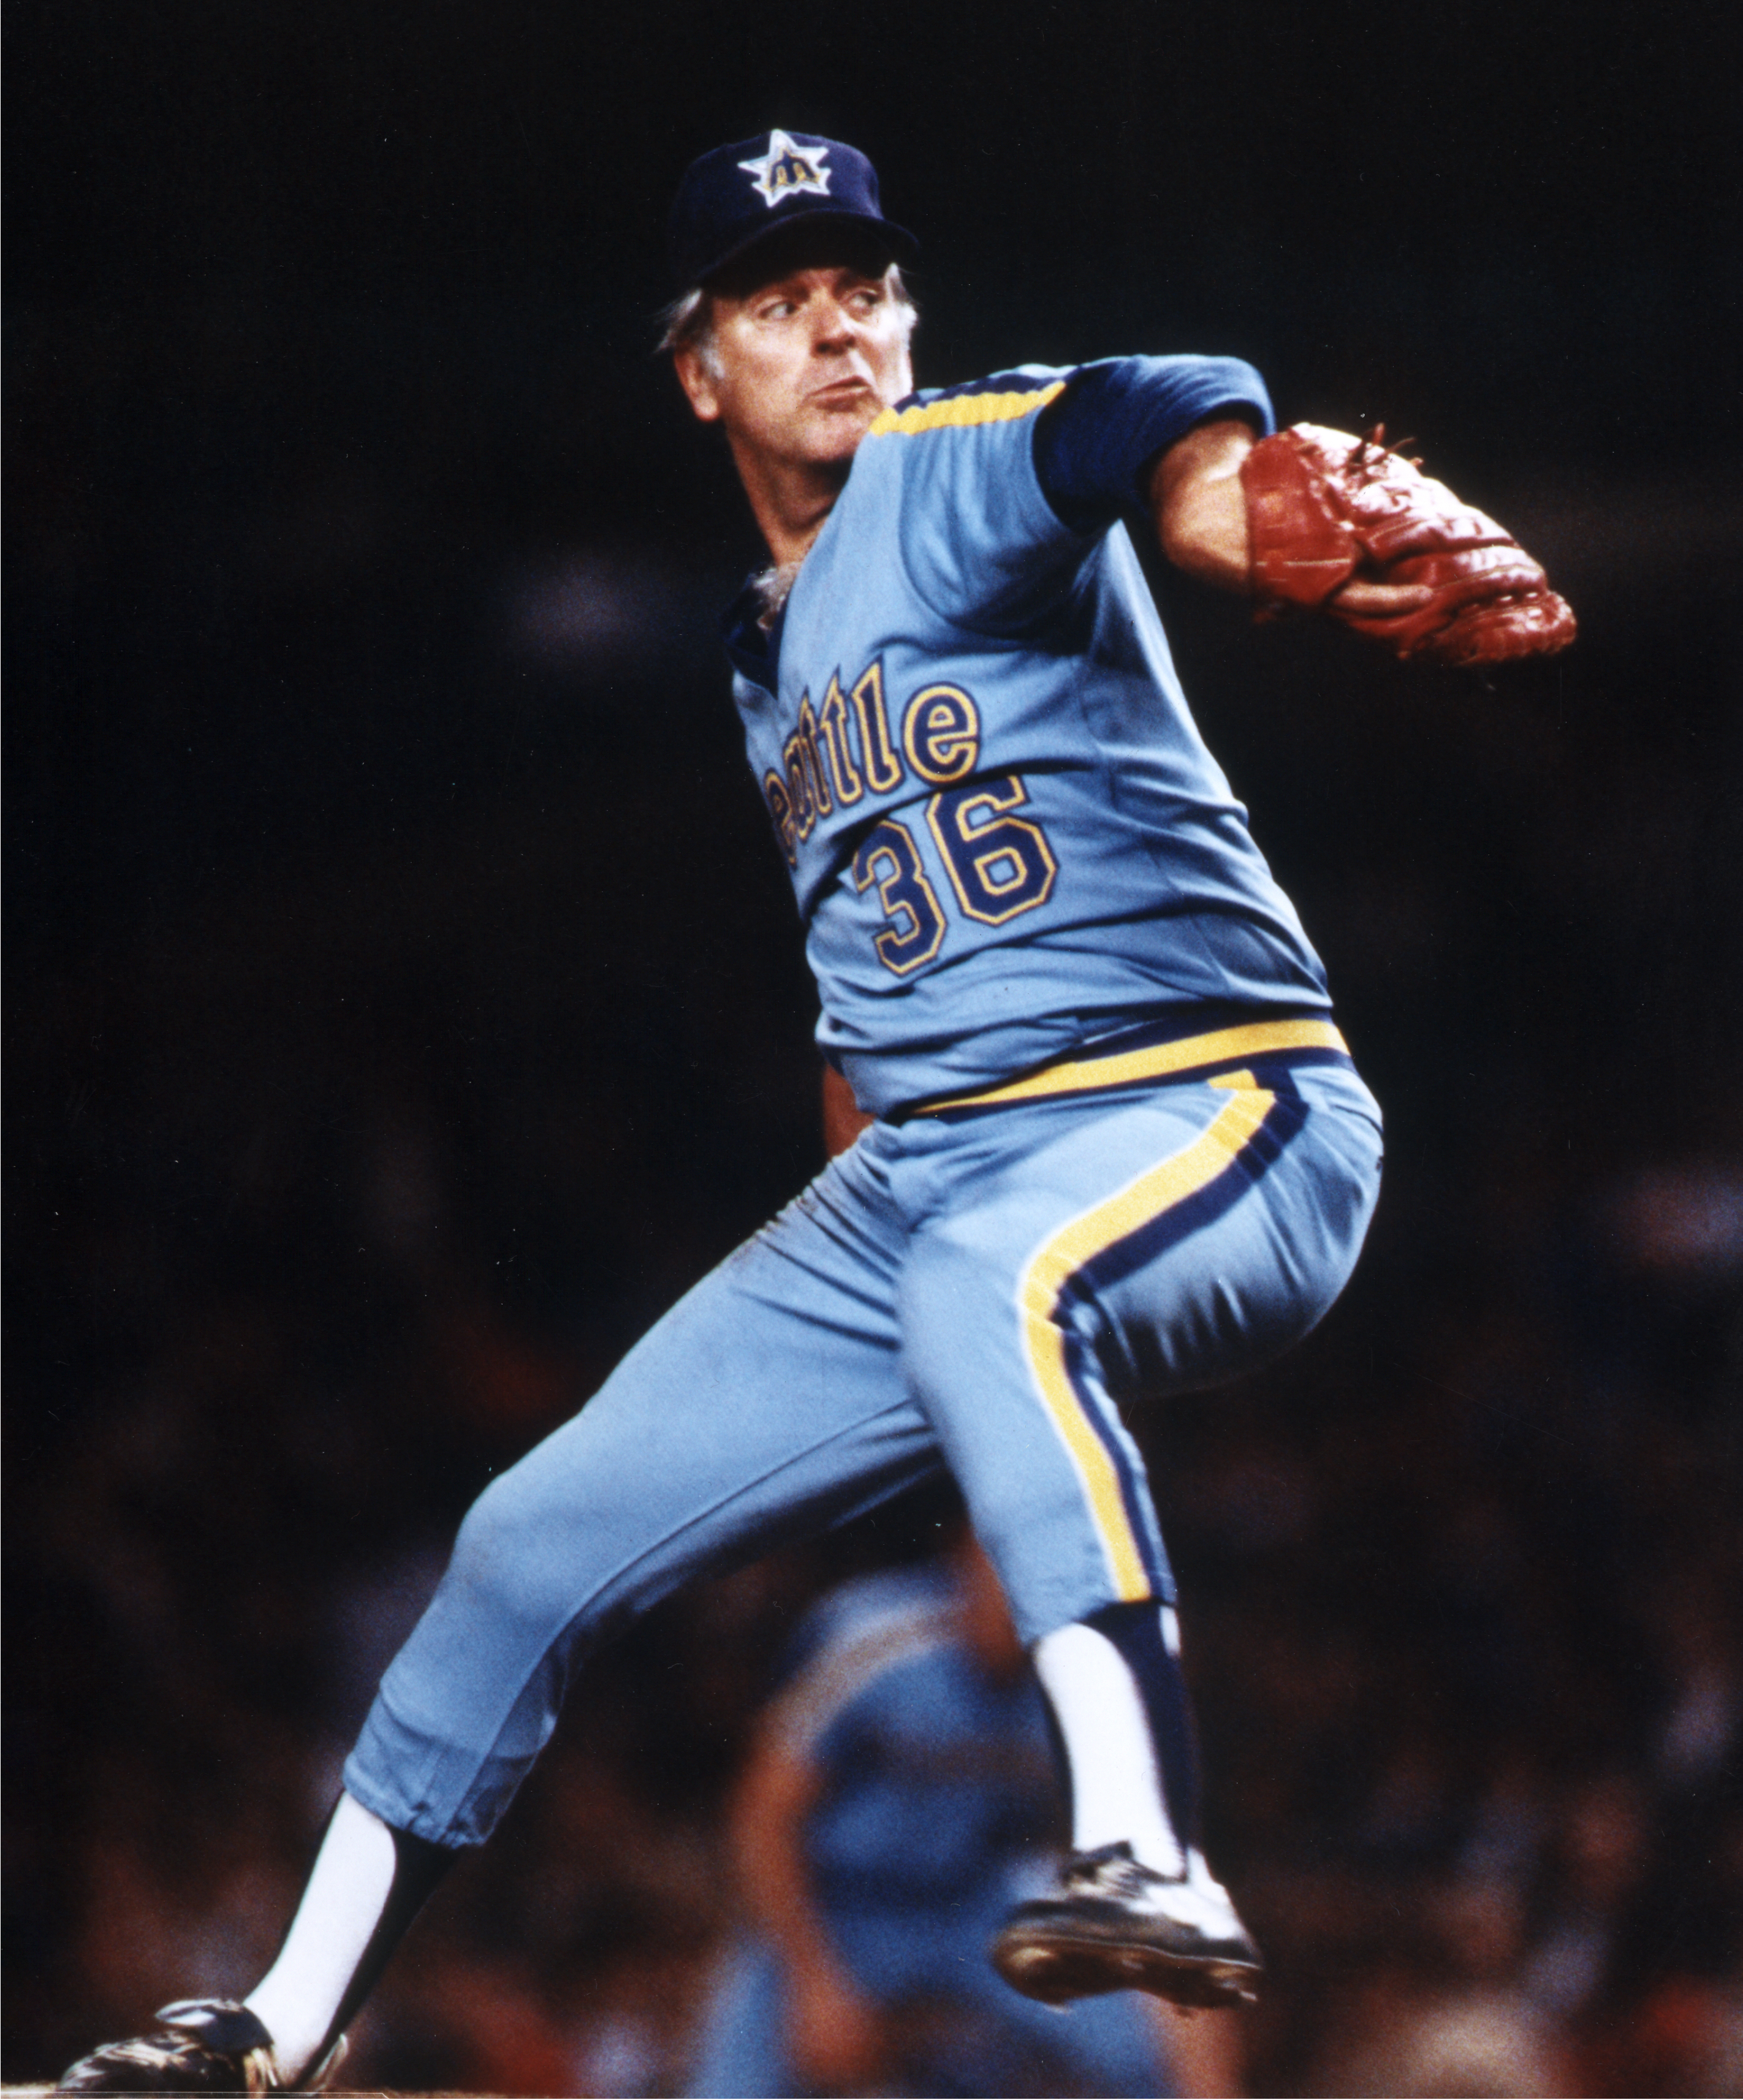 The Rays, formed in 1998, wear 'fauxback' uniforms from 1979